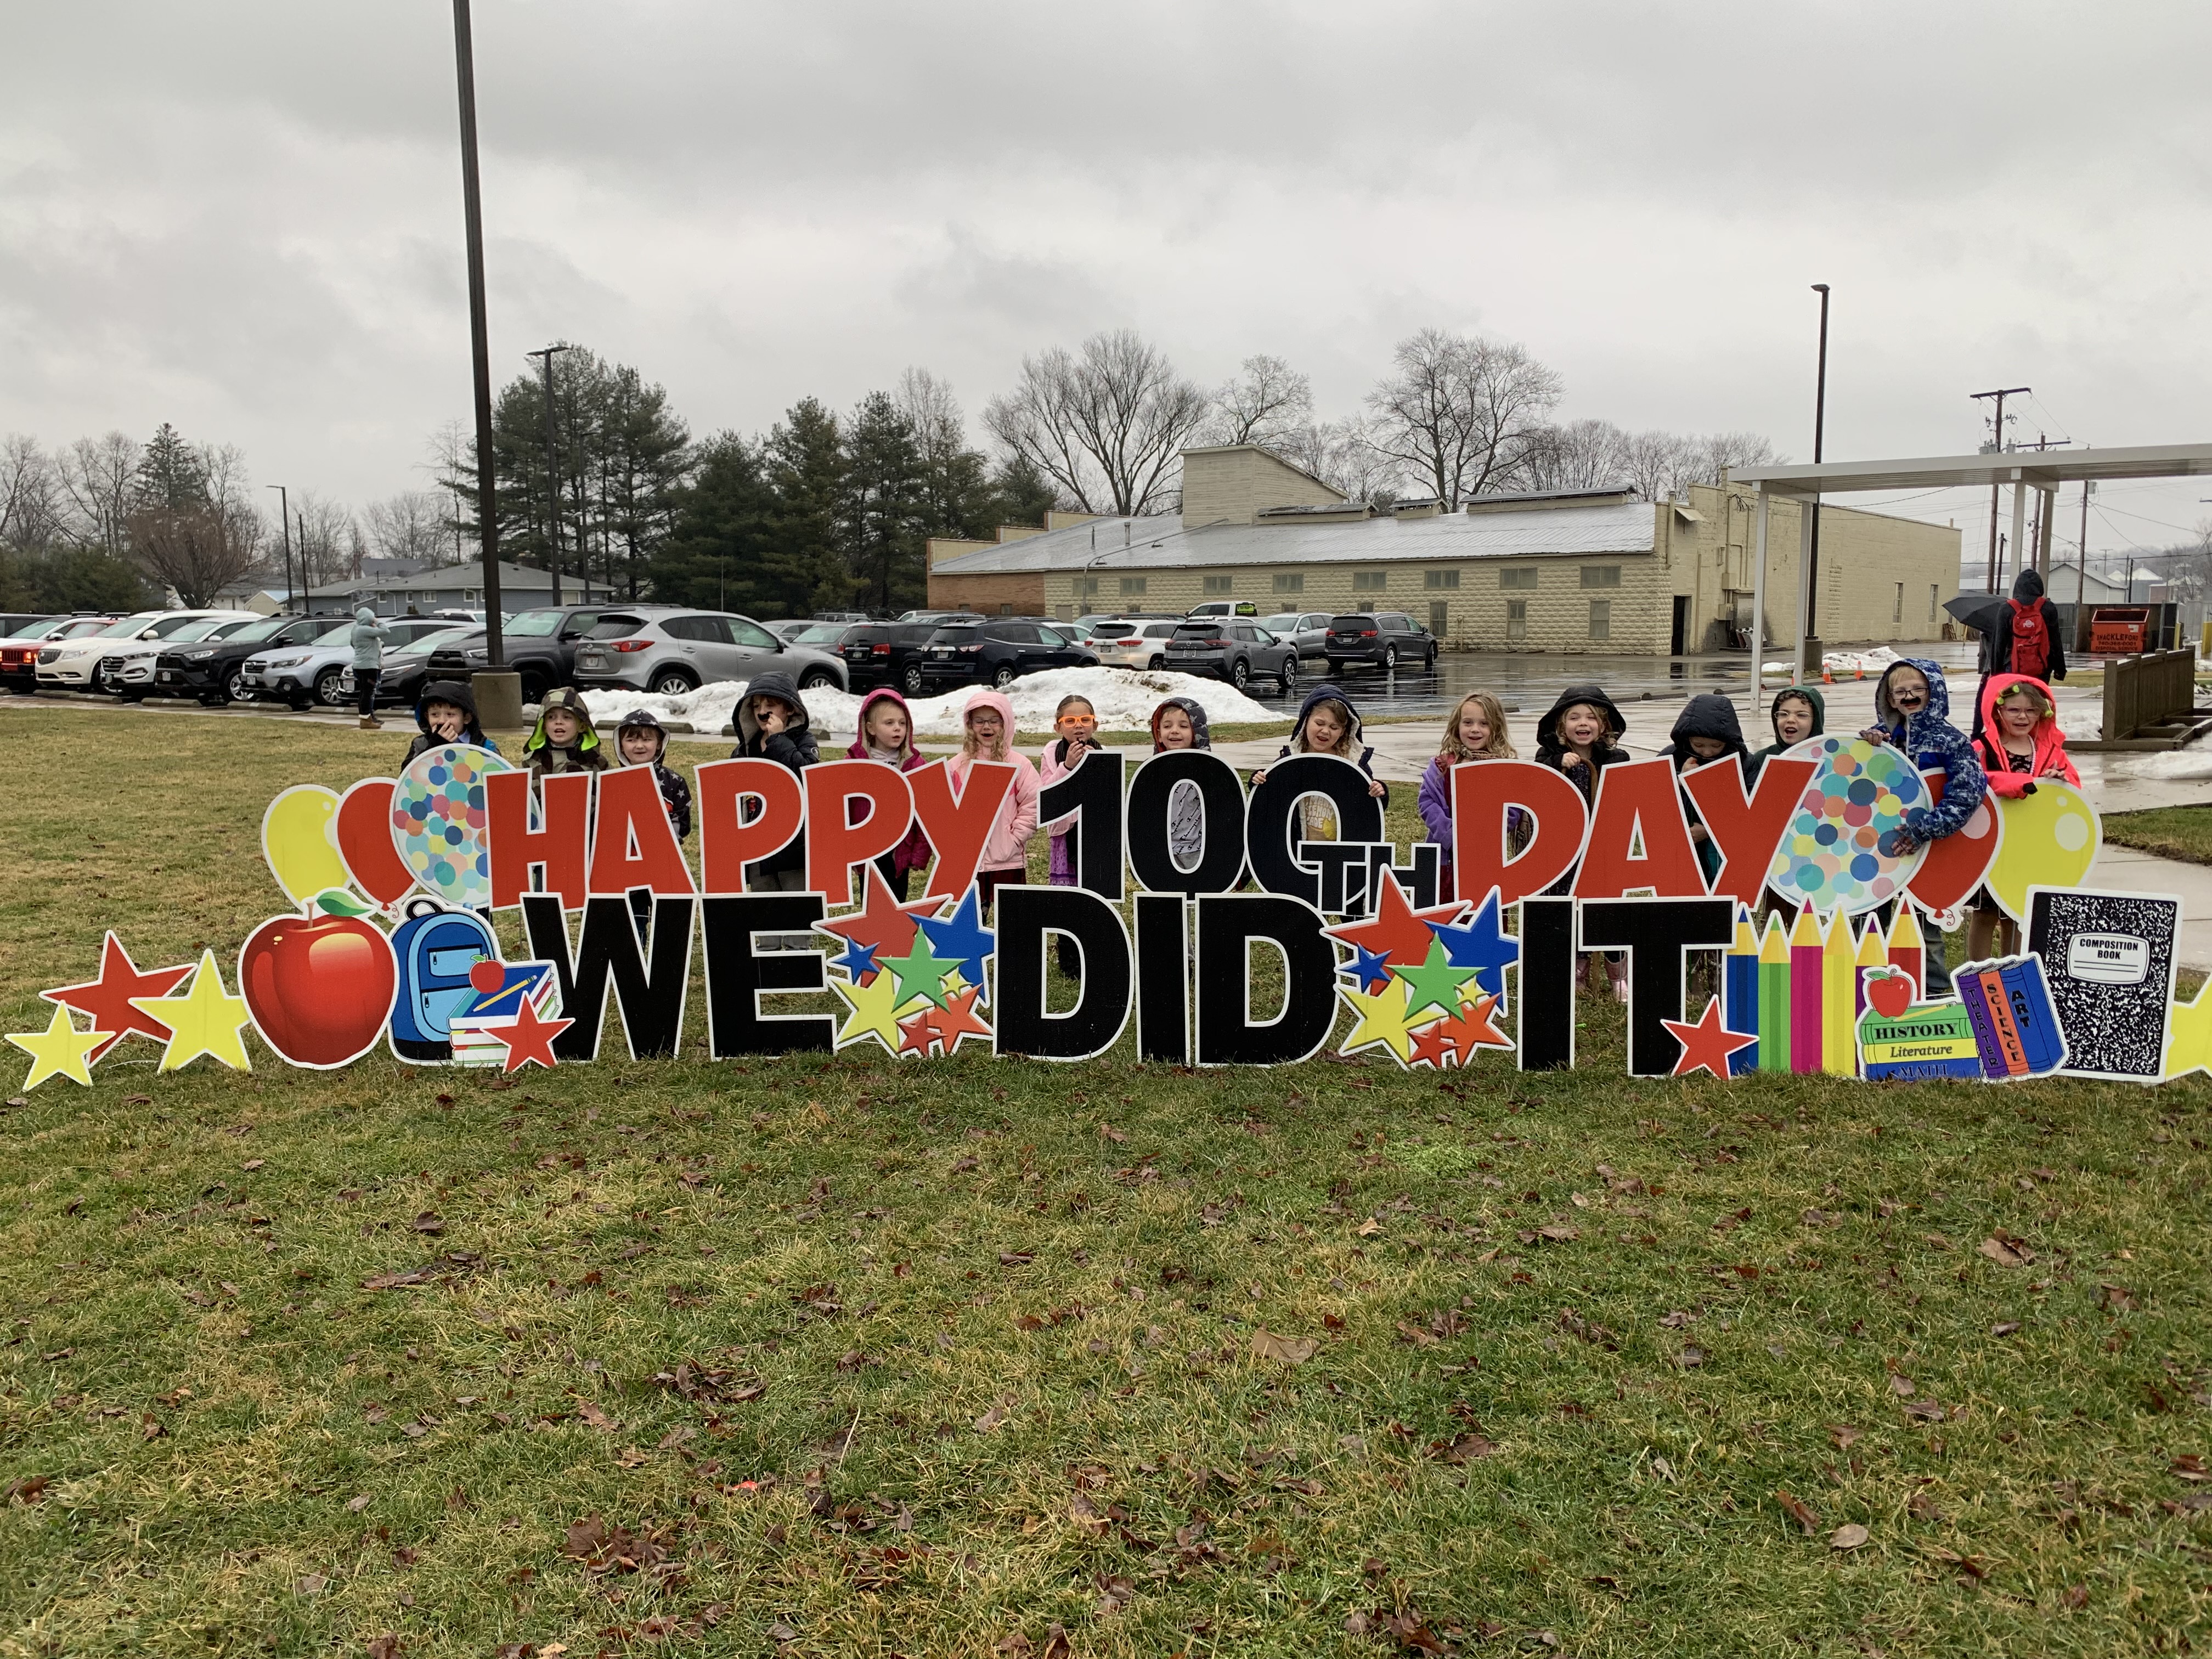 Photo of students by 100th Day yard sign